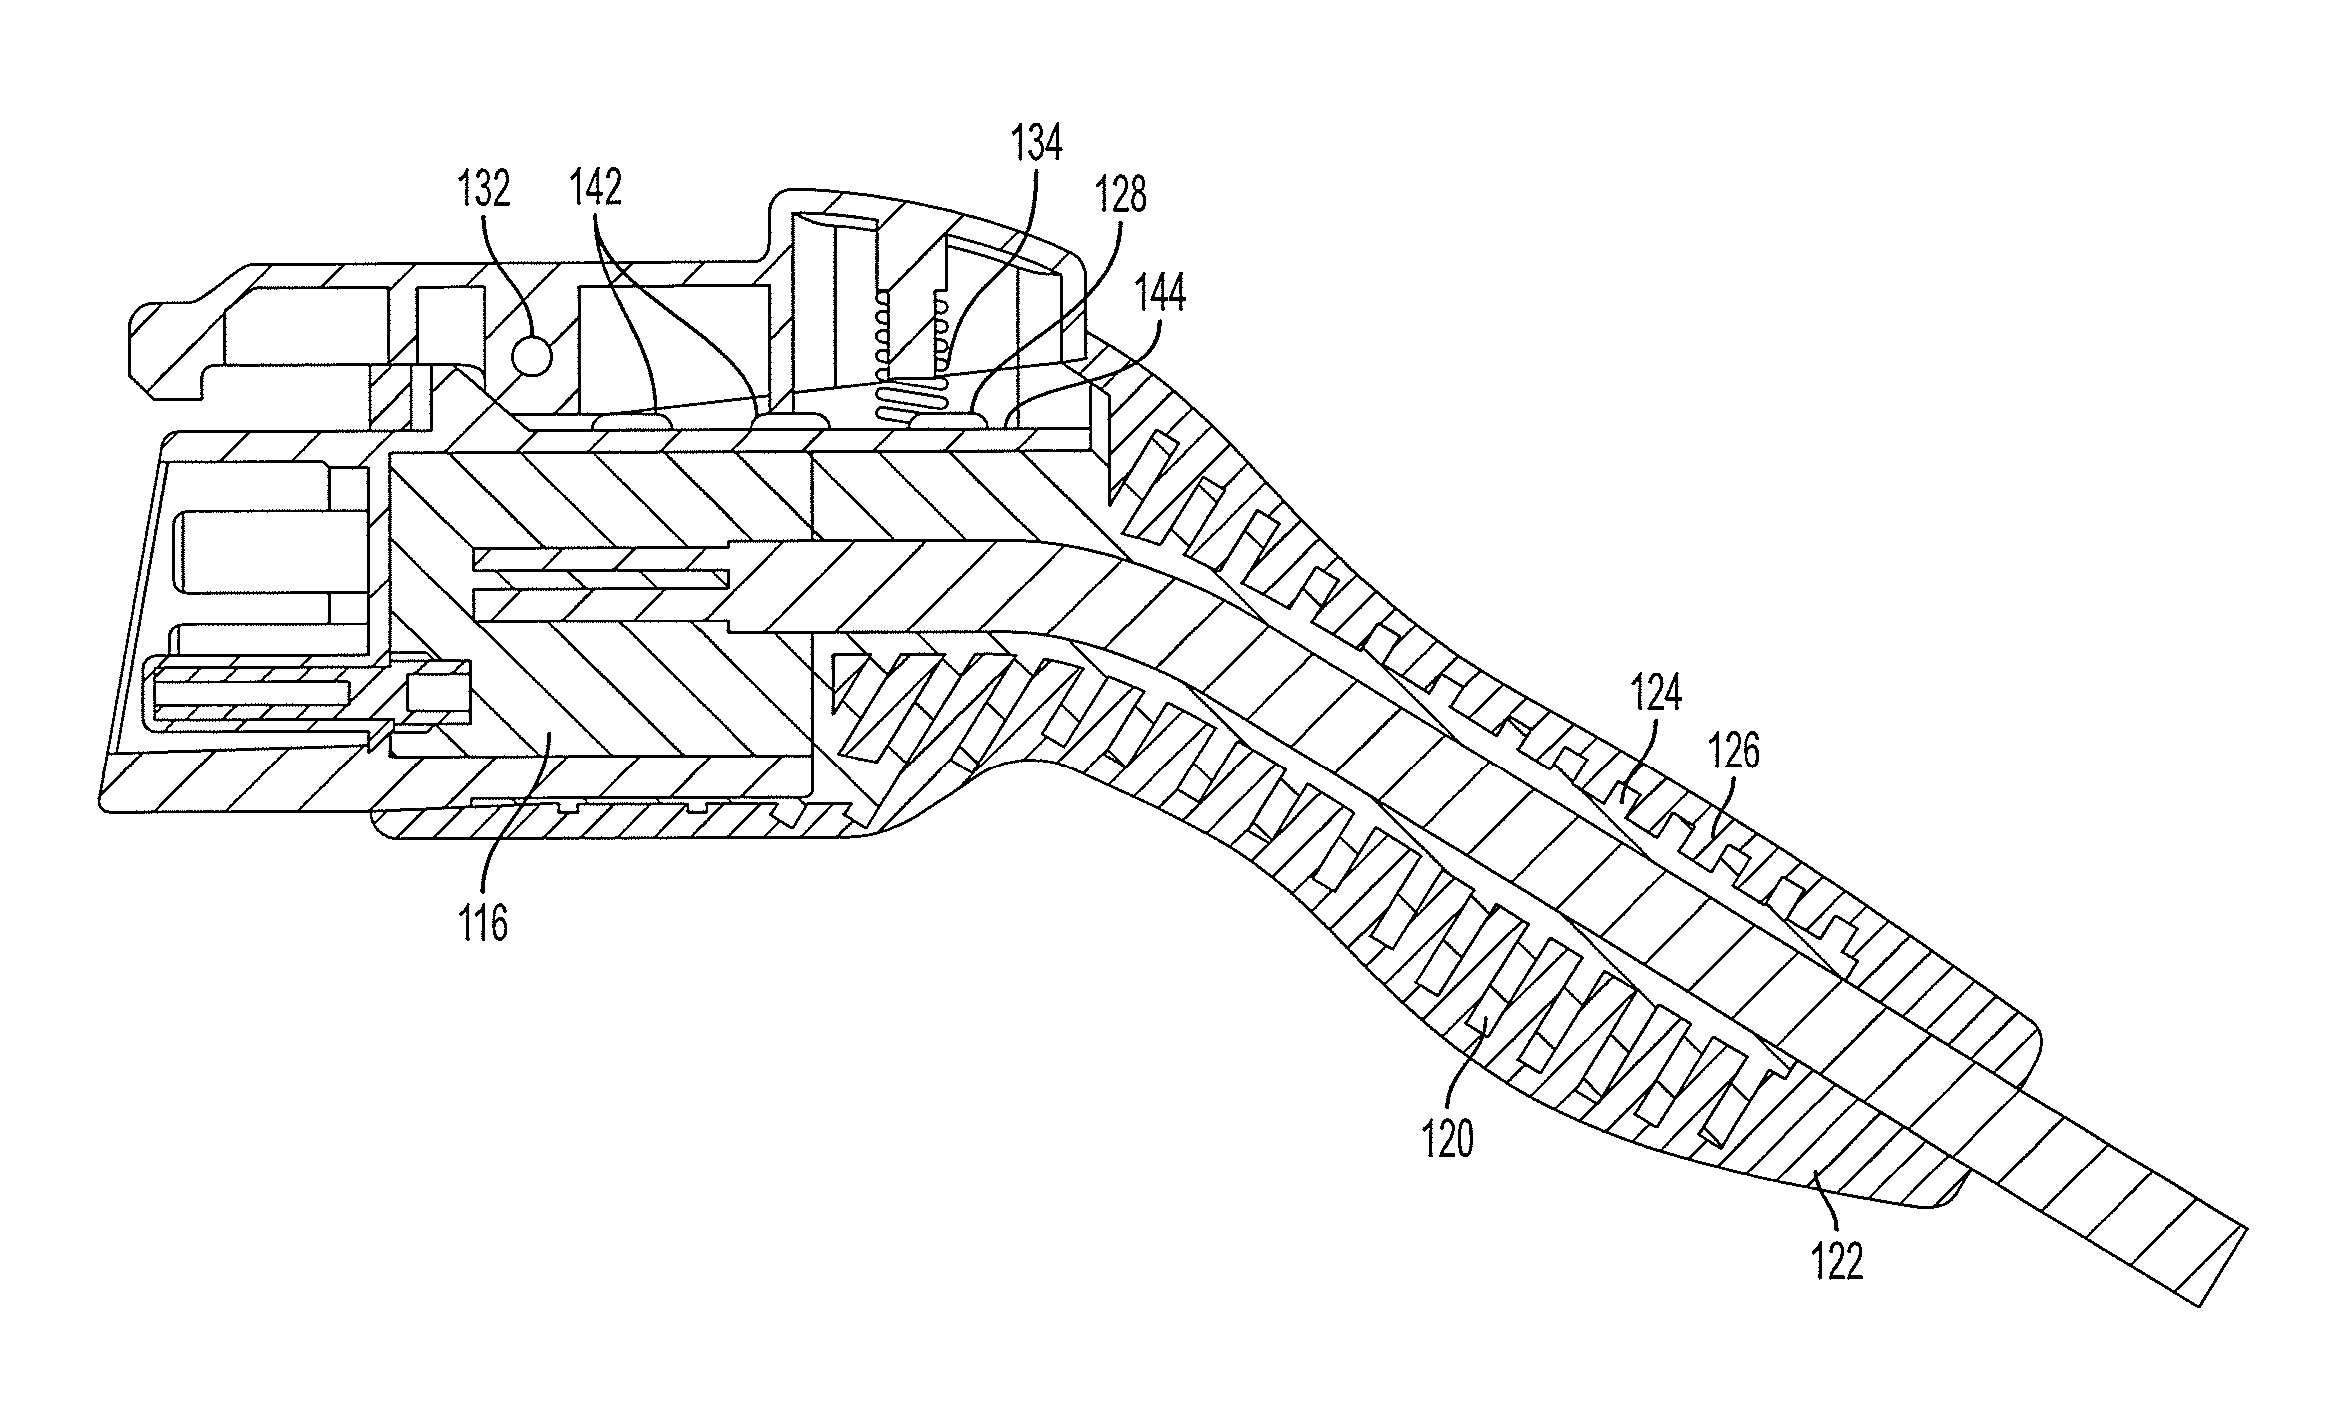 Laminous multi-polymeric high amperage over-molded connector assembly for plug-in hybrid electric vehicle charging